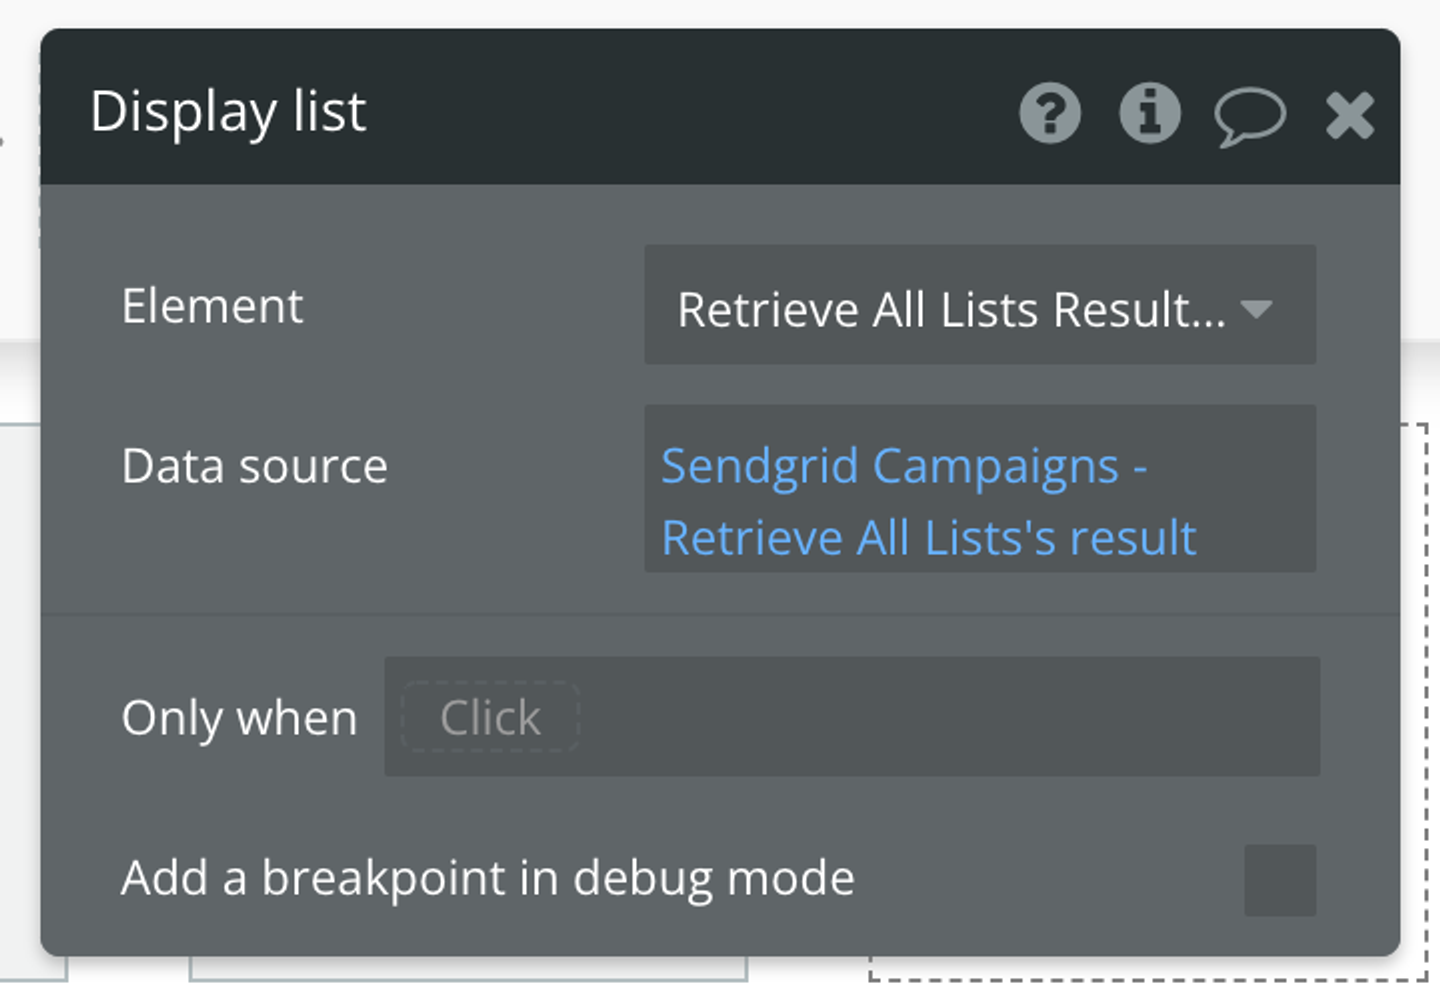 Select Sendgrid Campaigns - Retrieve All List's result for the data source